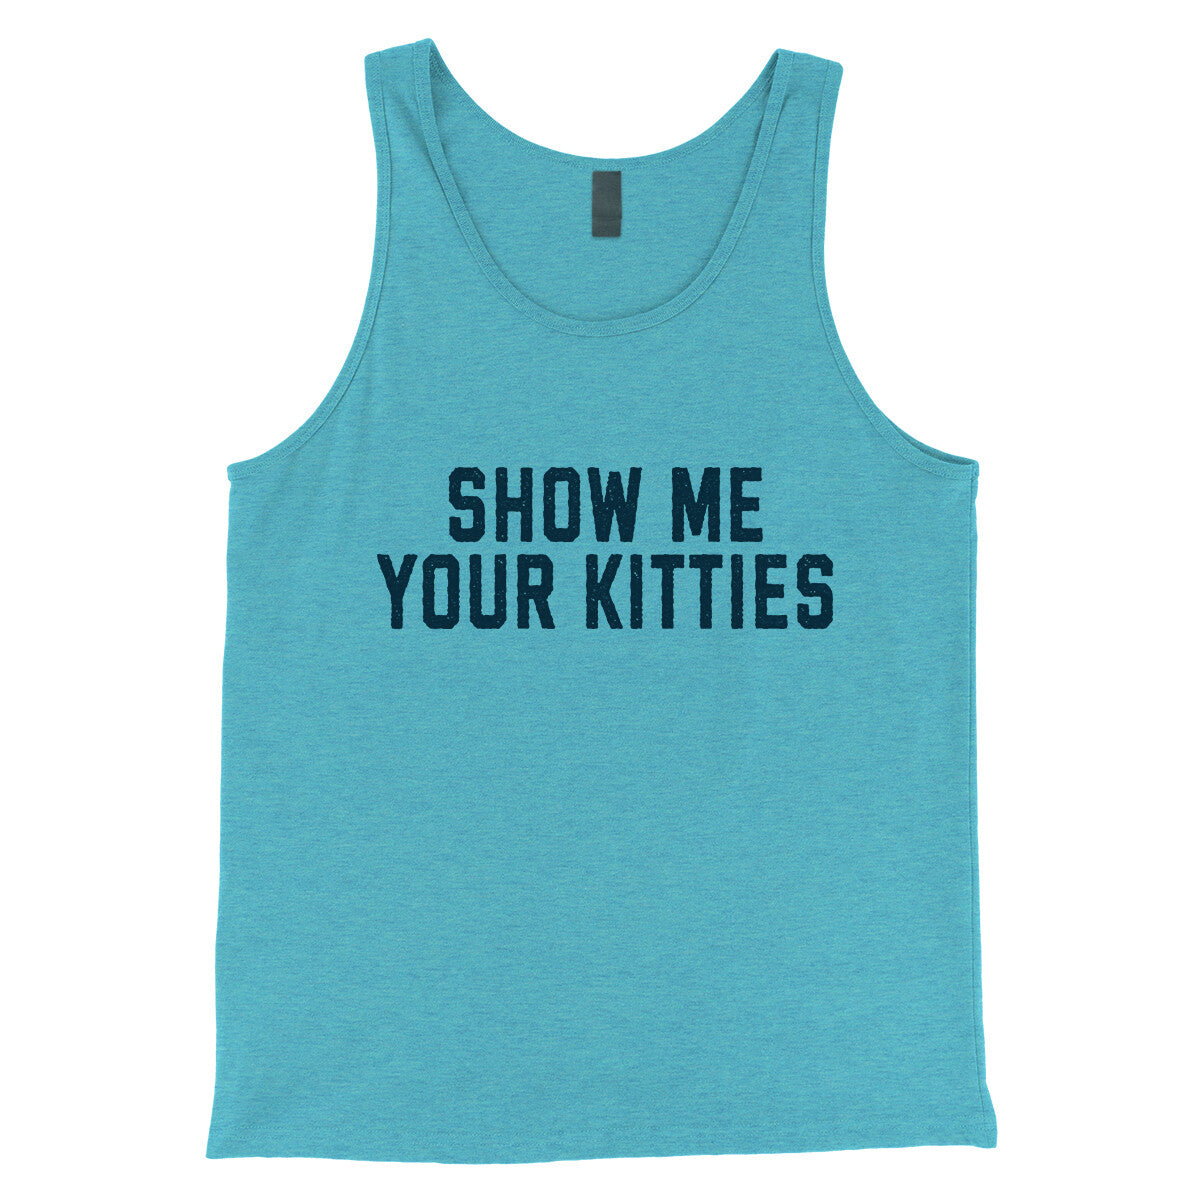 Show me Your Kitties in Aqua Triblend Color